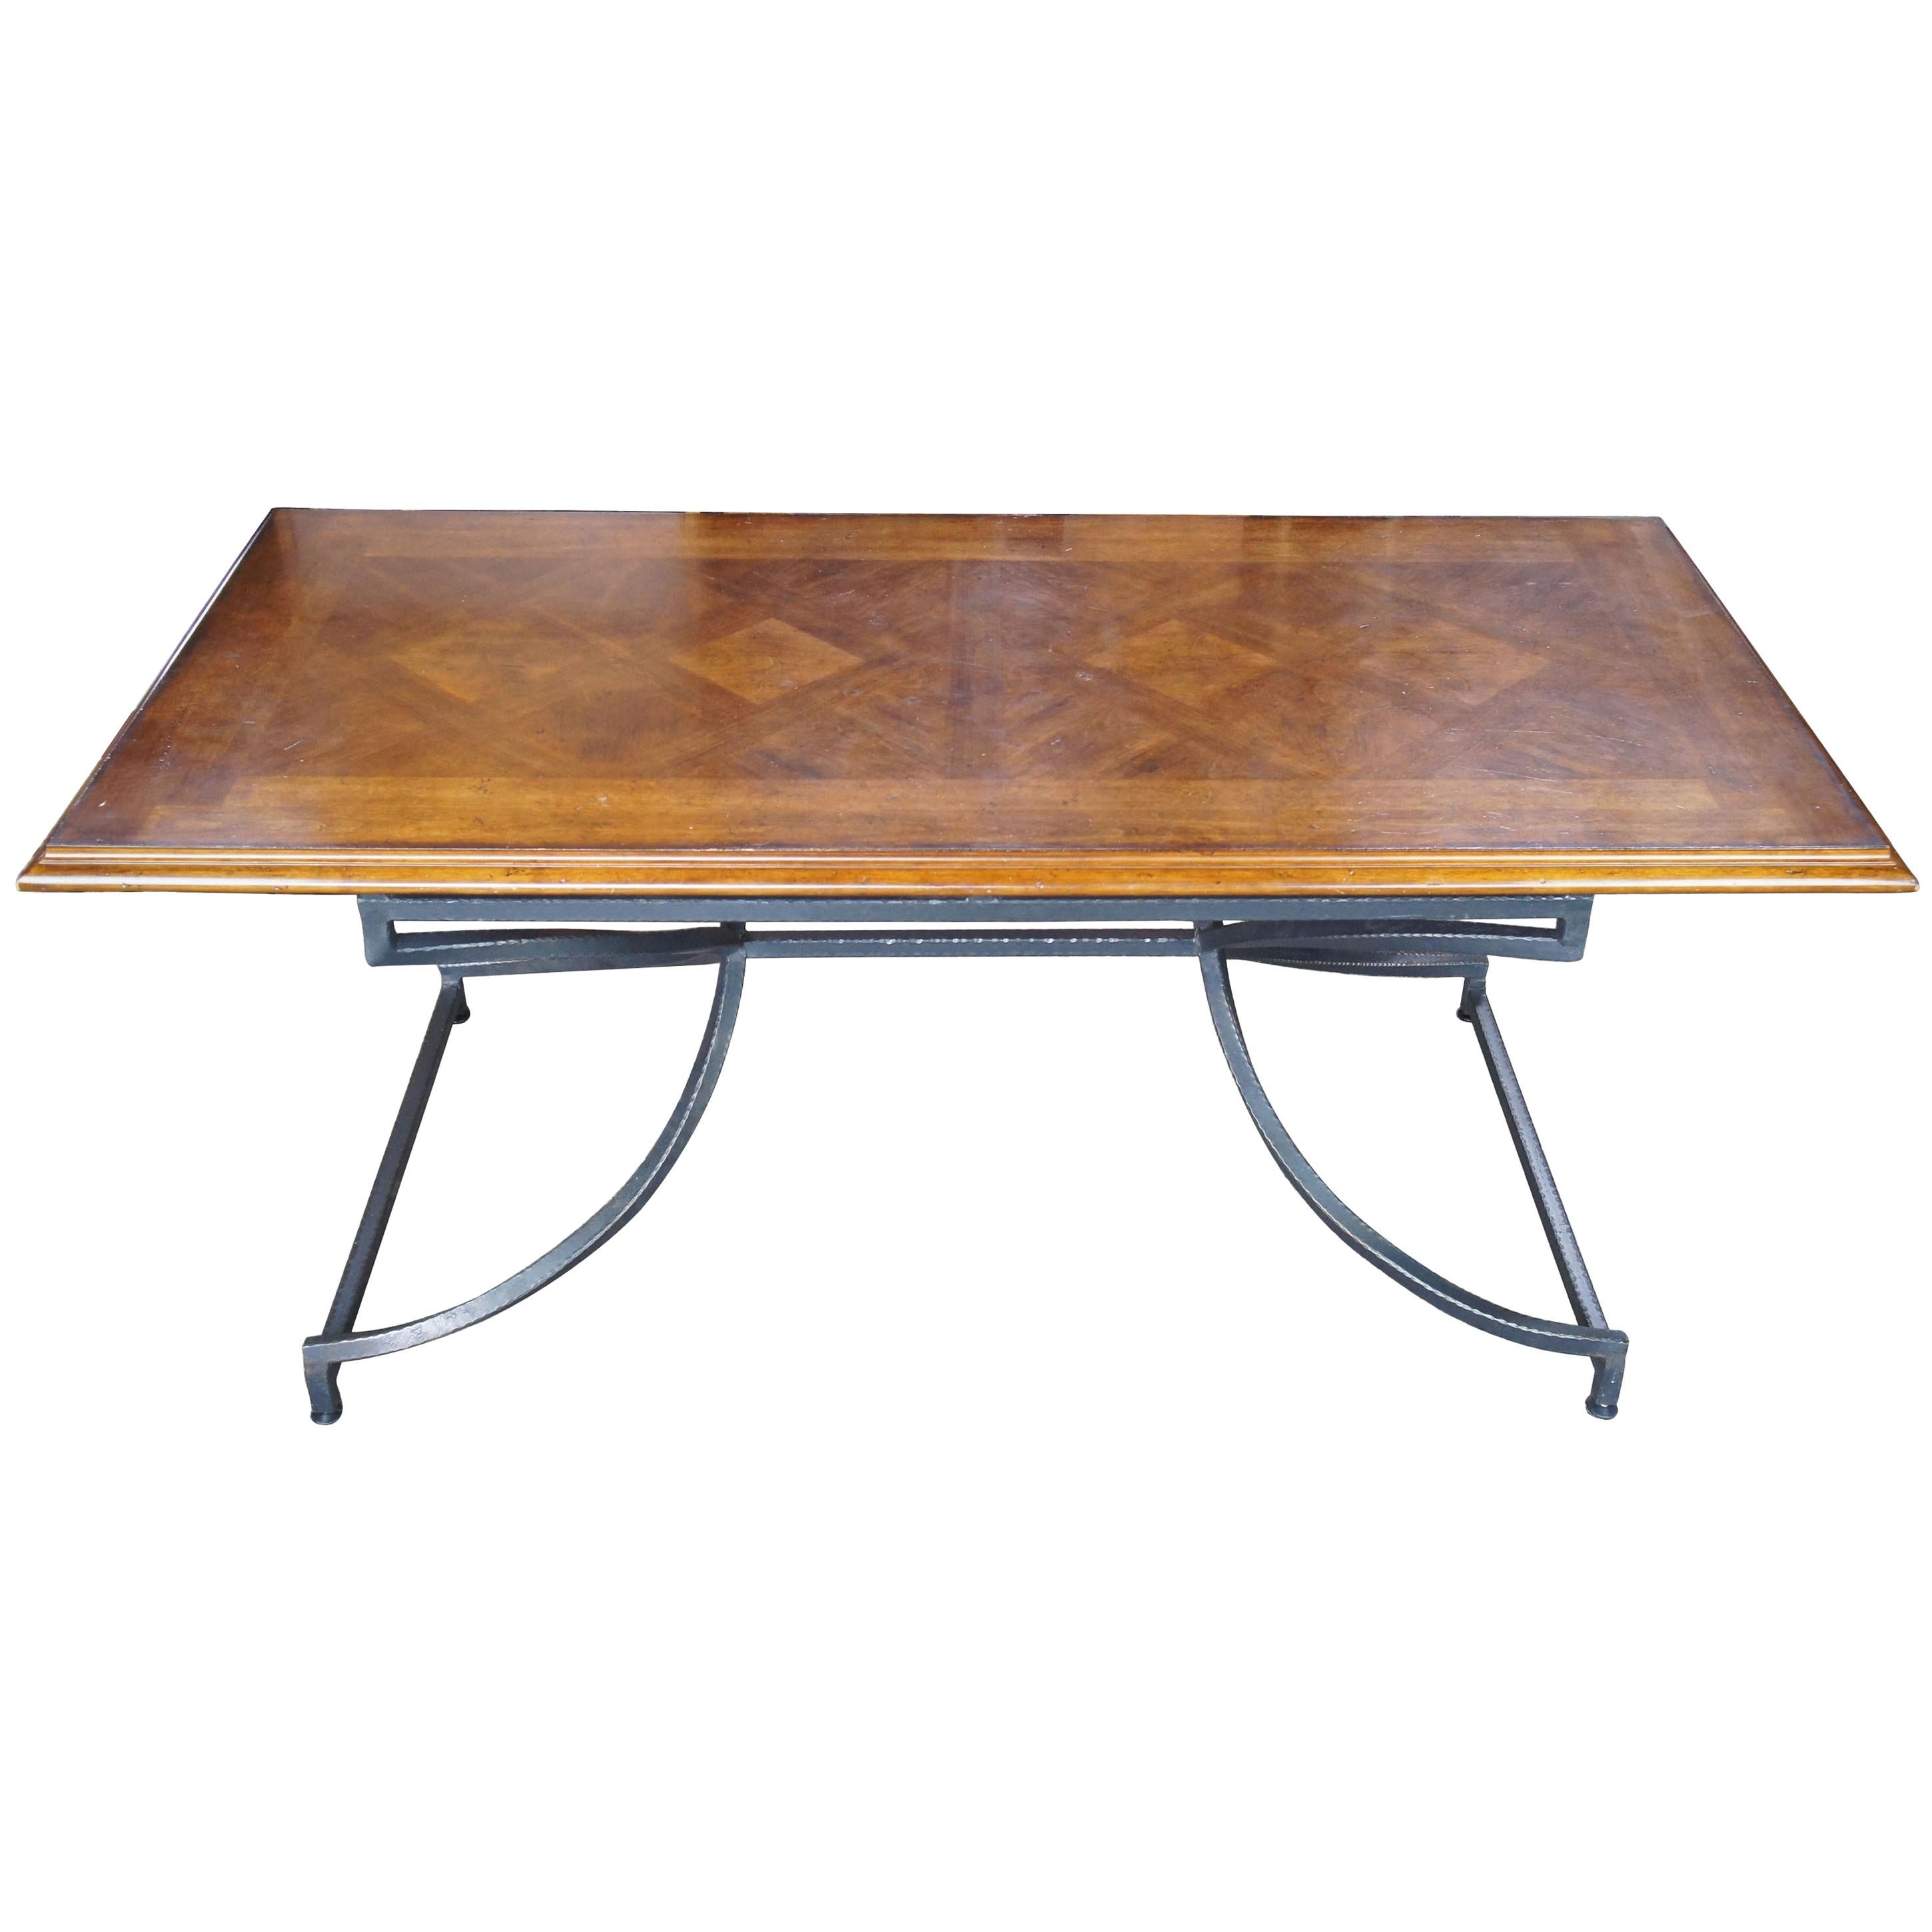 Century Furniture Giotto Work Table Walnut Finish Iron Base Dining Console Hall